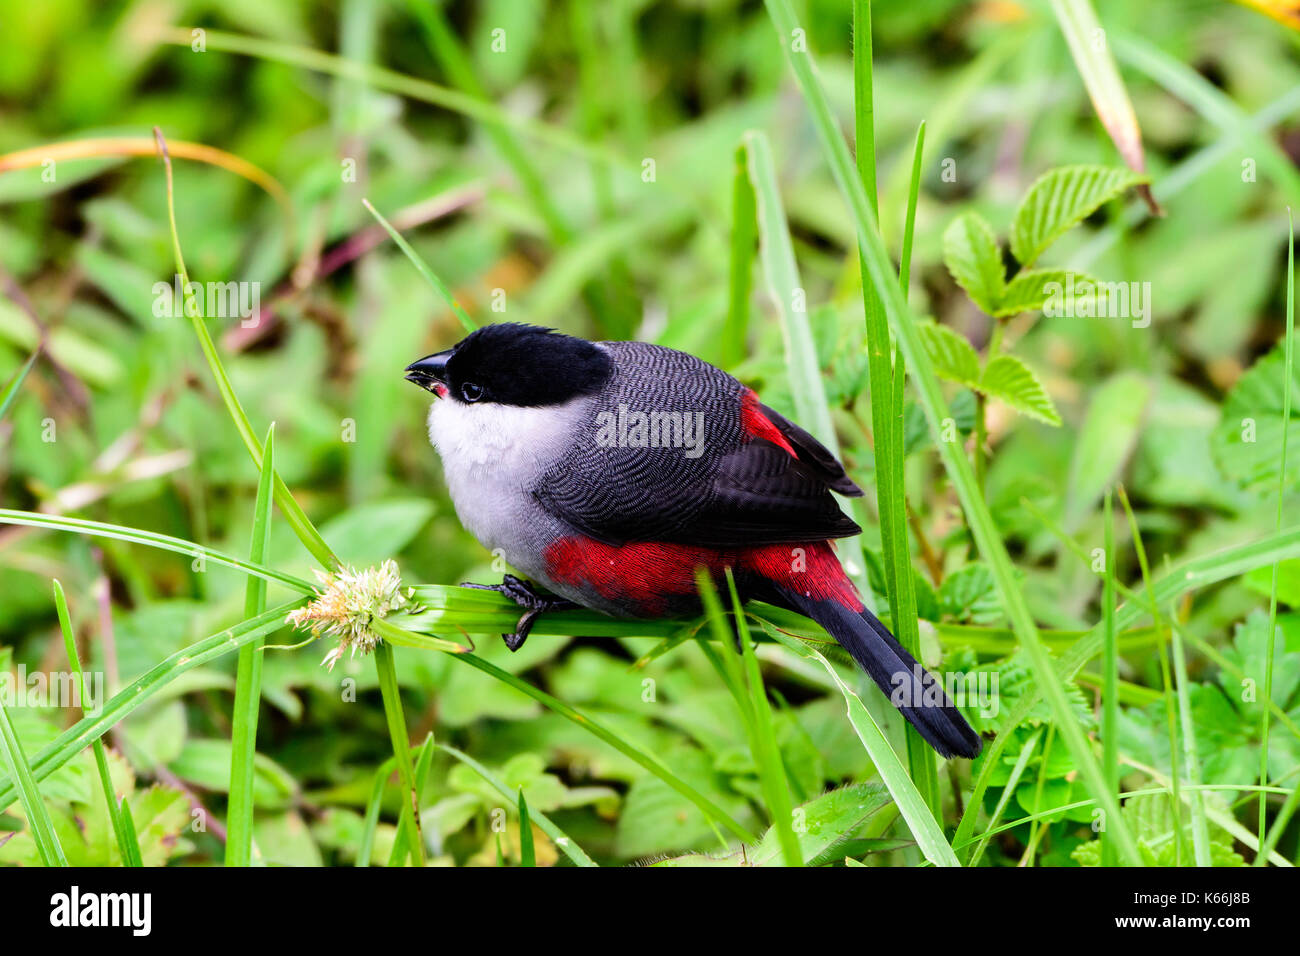 Black crowned waxbill on the ground Stock Photo